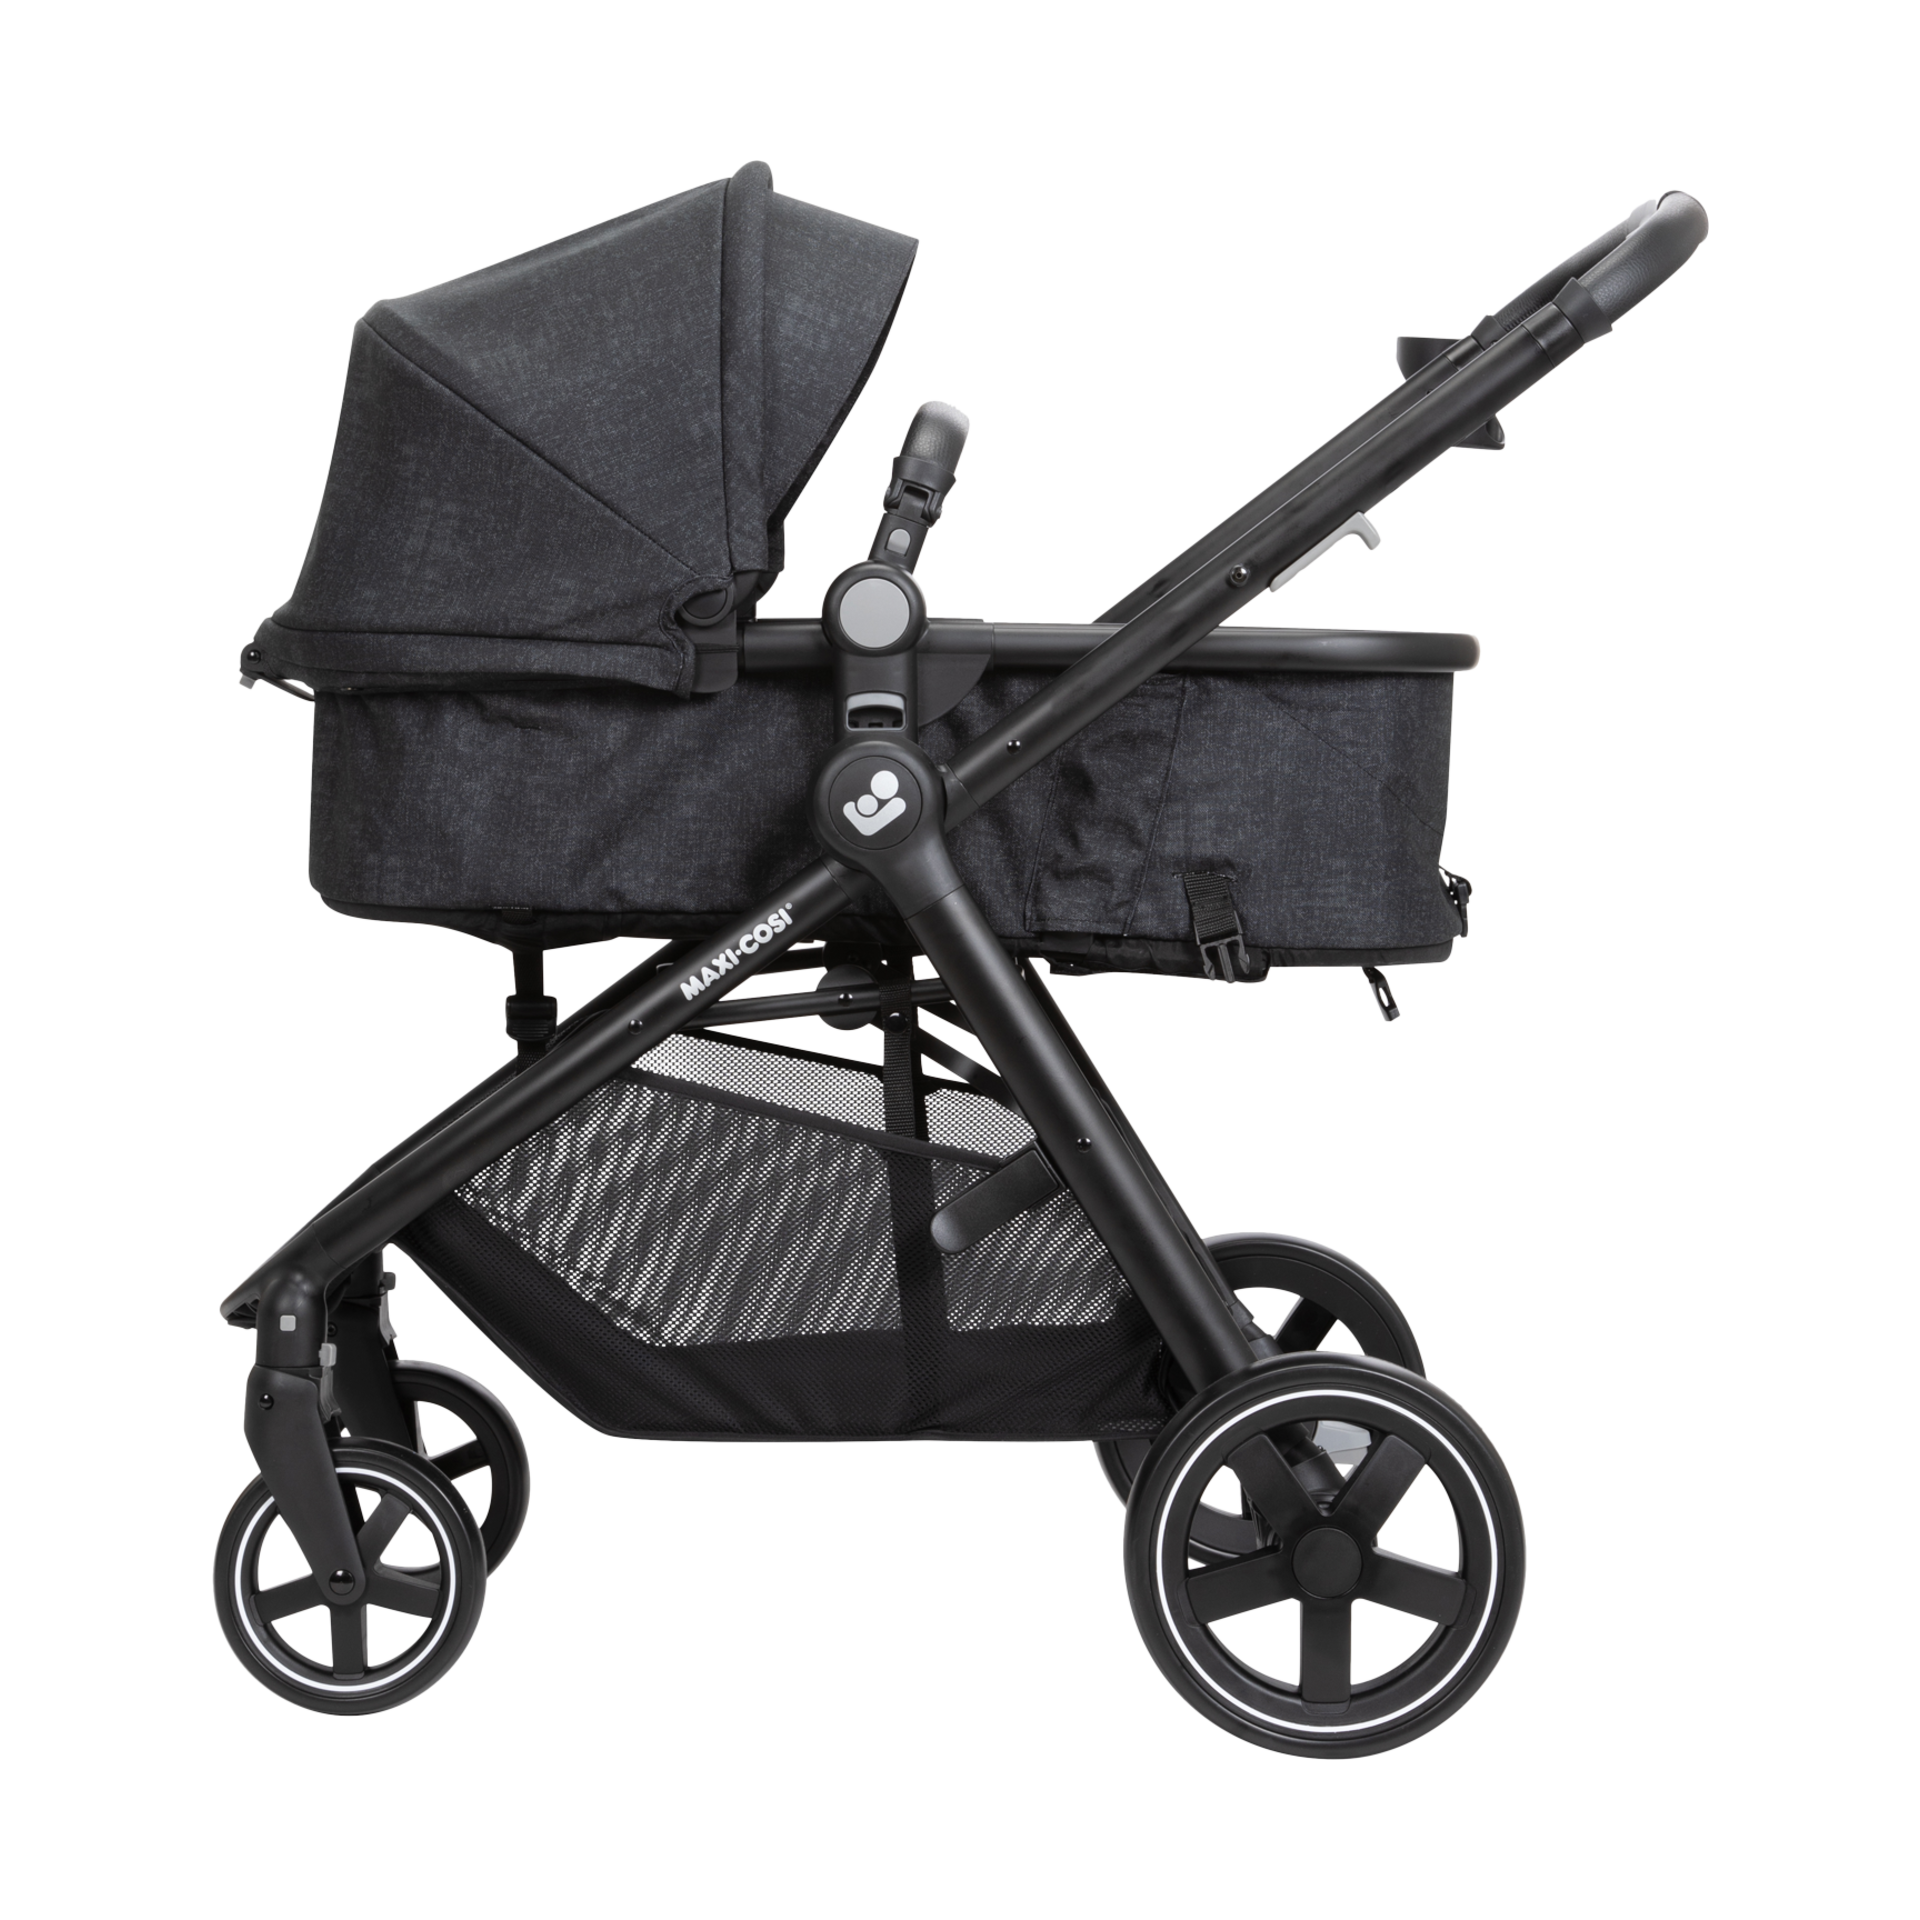 maxi cosi travel system 3 in 1